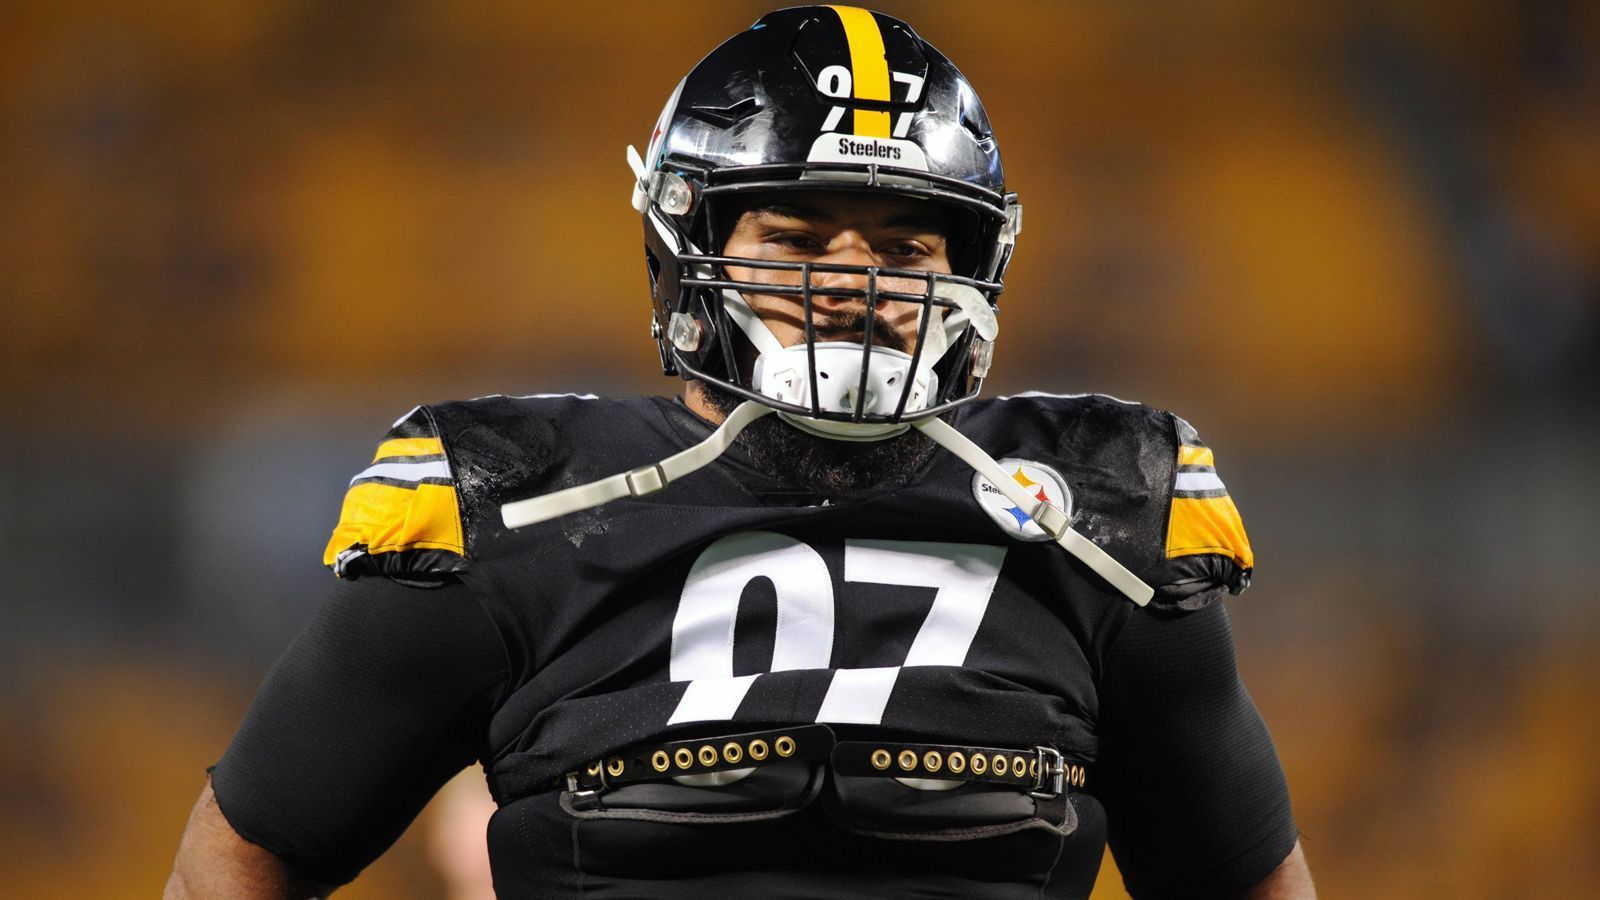 
                <strong>Pittsburgh Steelers: Cameron Heyward</strong><br>
                Position: Defensive End
              